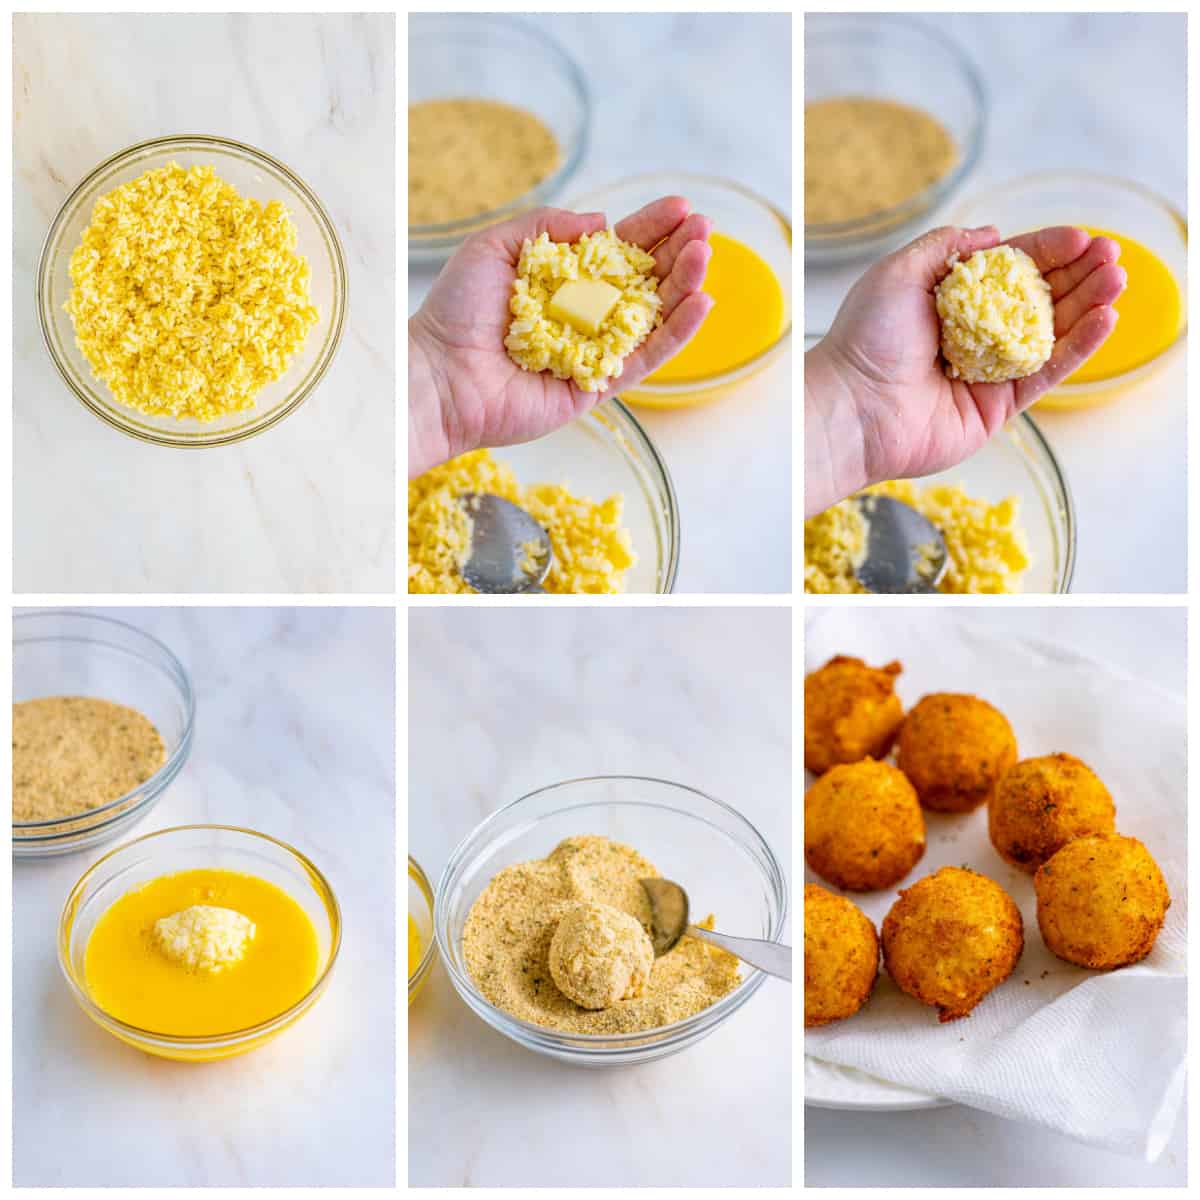 Step by step photos on how to make Arancini.